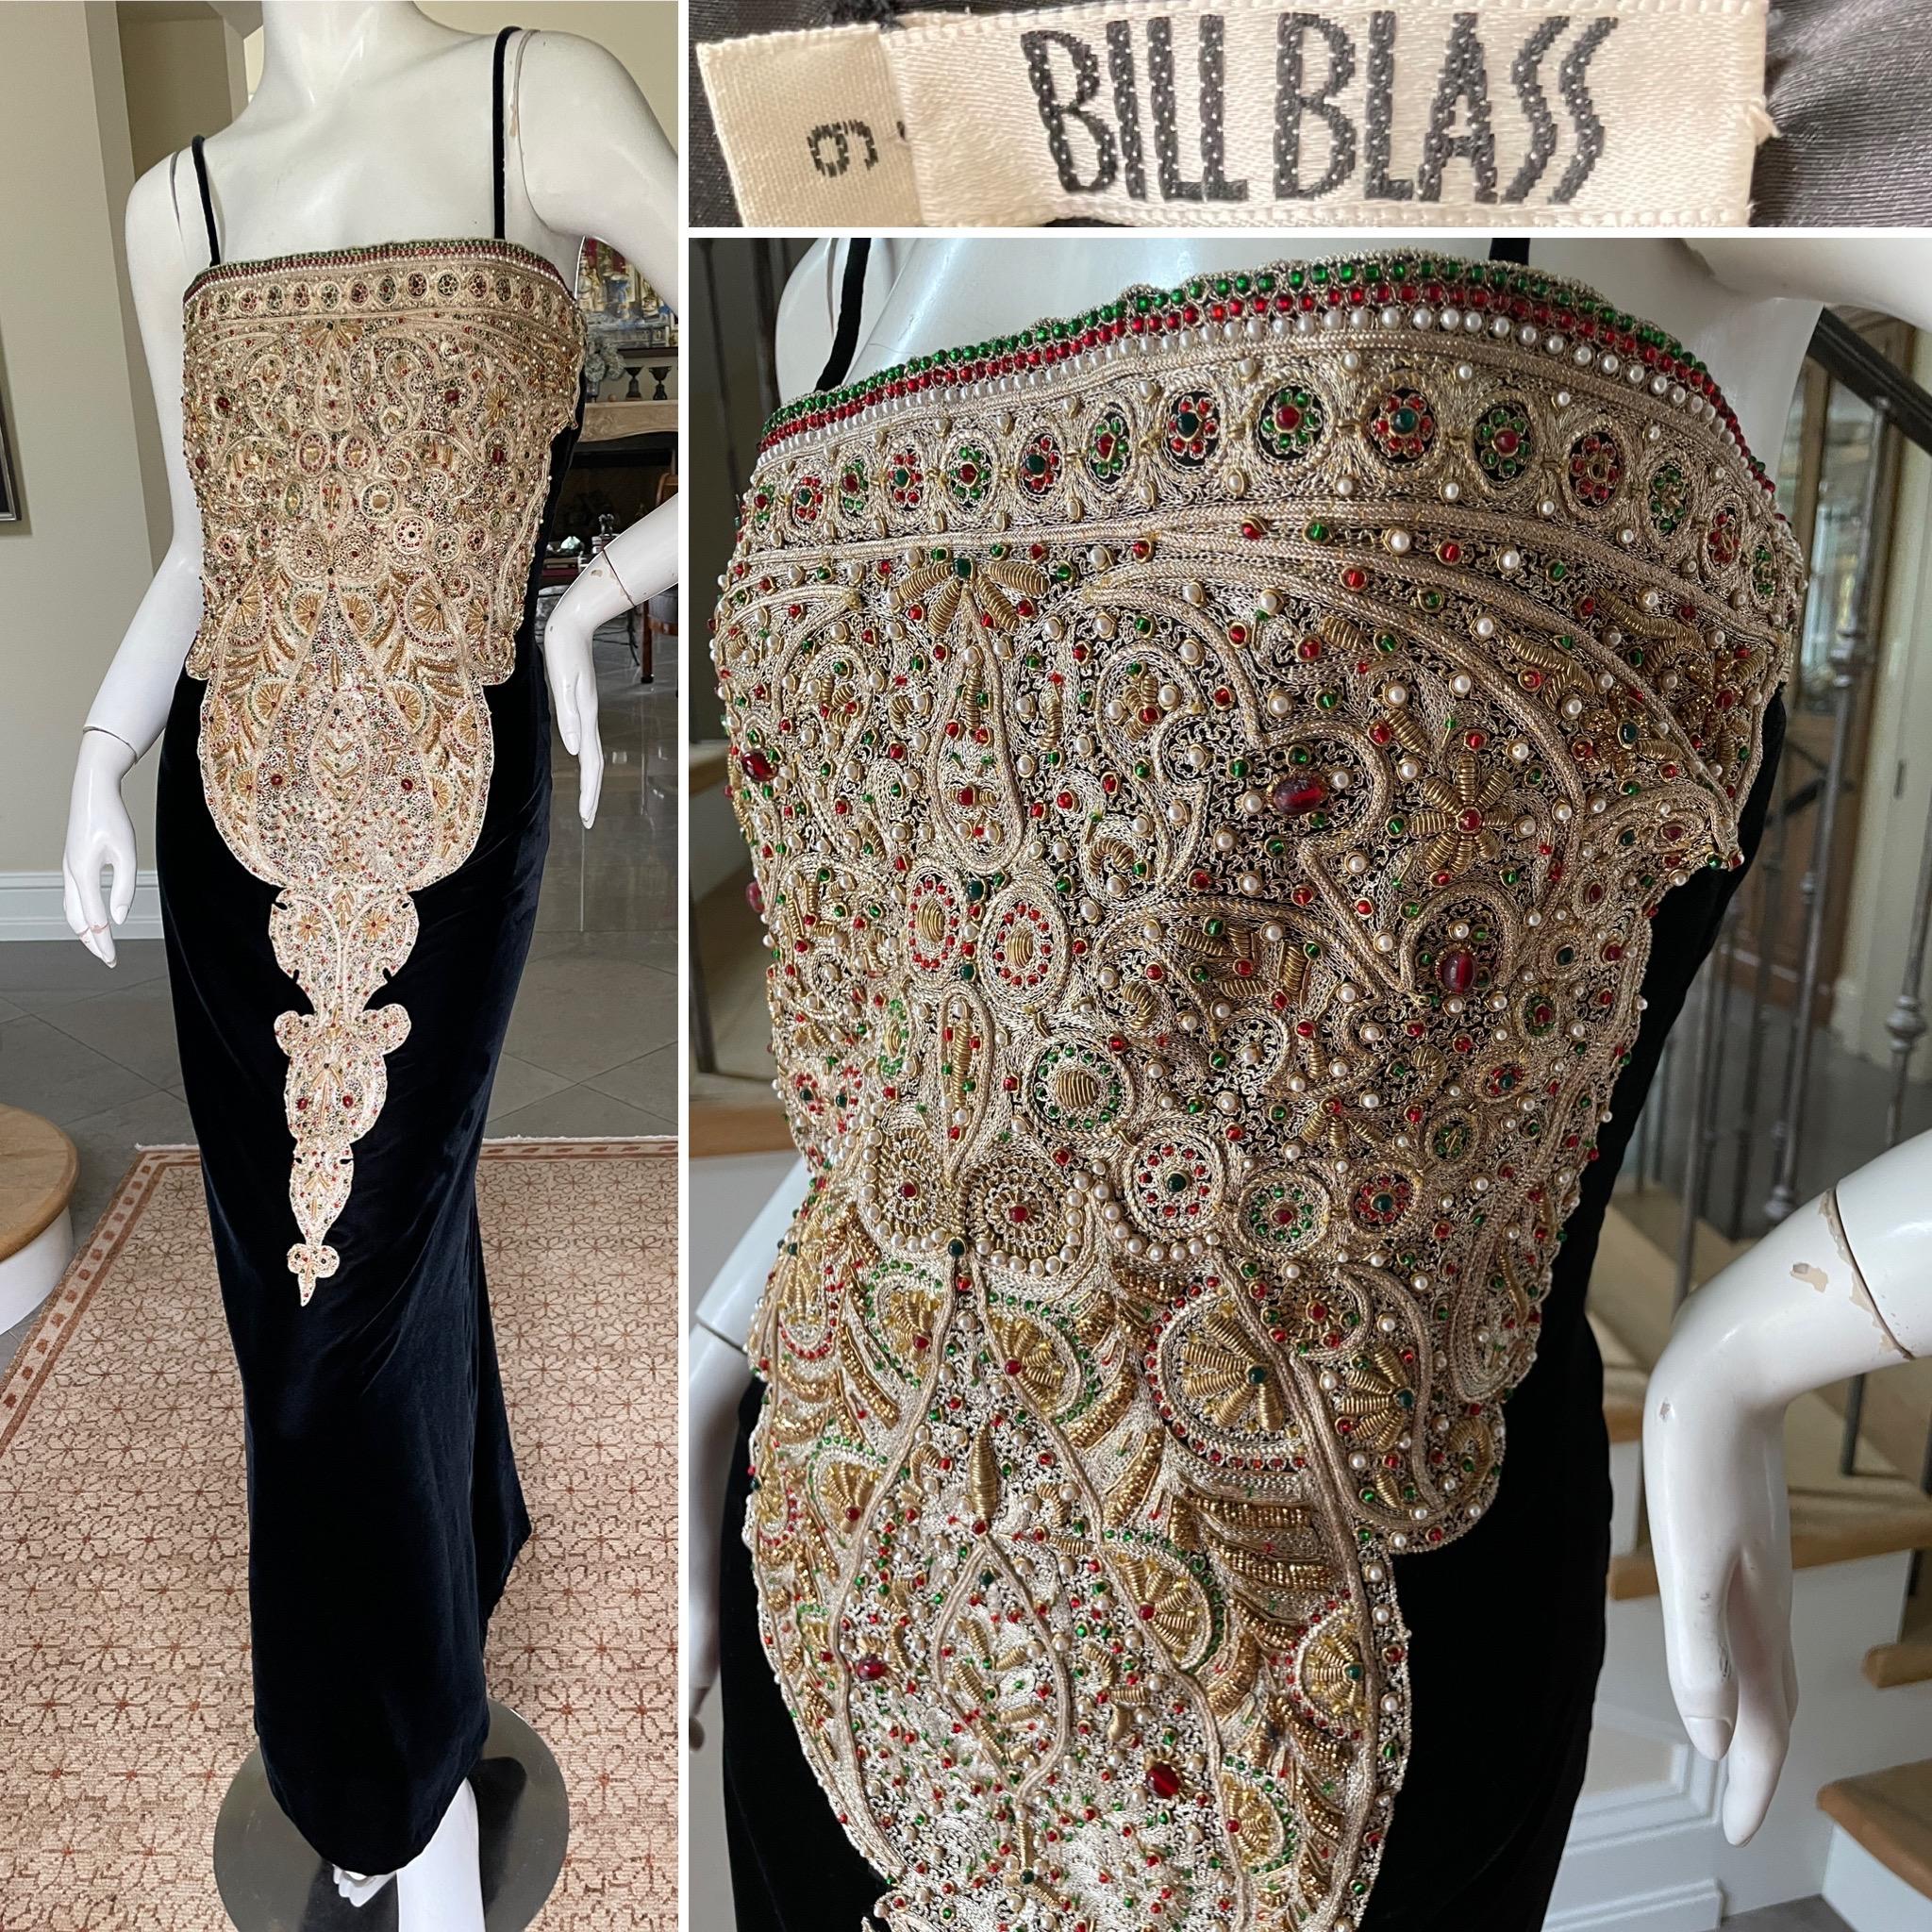 Bill Blass 1980's Black Velvet Dress with Gold and Jewel Embellishments 
So beautiful, much prettier in person.
This is exquisite, please use the zoom feature to see details.
 Size 6
 Bust 34